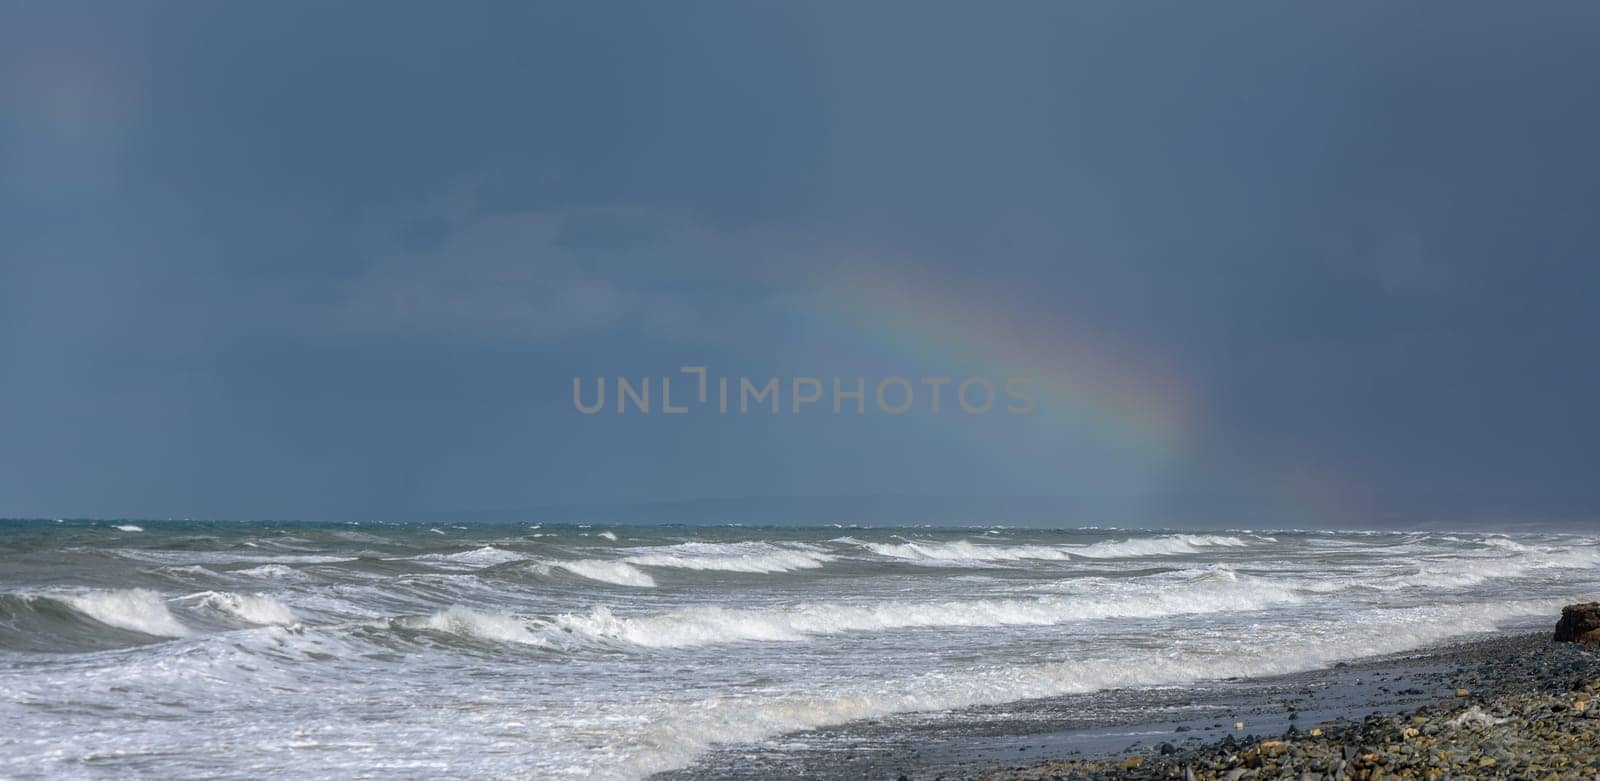 rainbow over the Mediterranean sea during a storm 2 by Mixa74